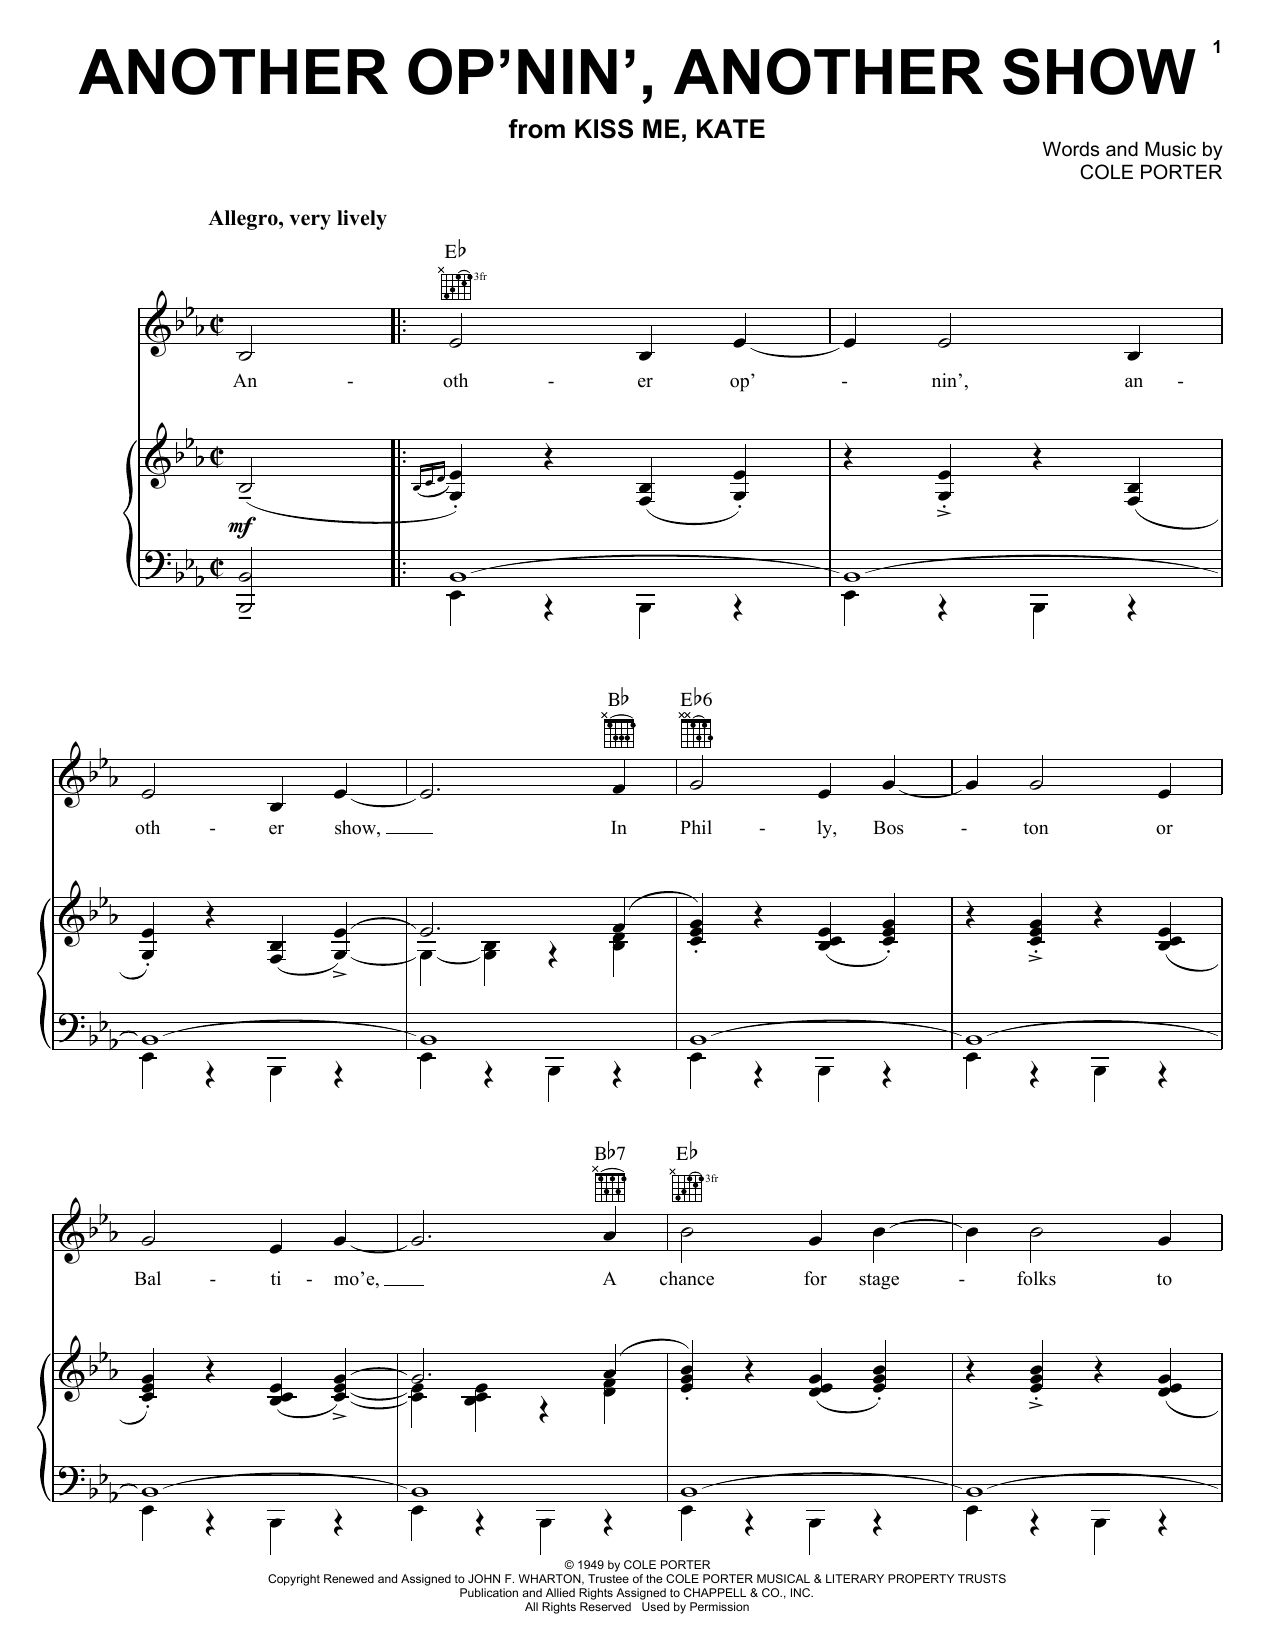 Cole Porter Another Op'nin', Another Show (from Kiss Me, Kate) sheet music notes printable PDF score